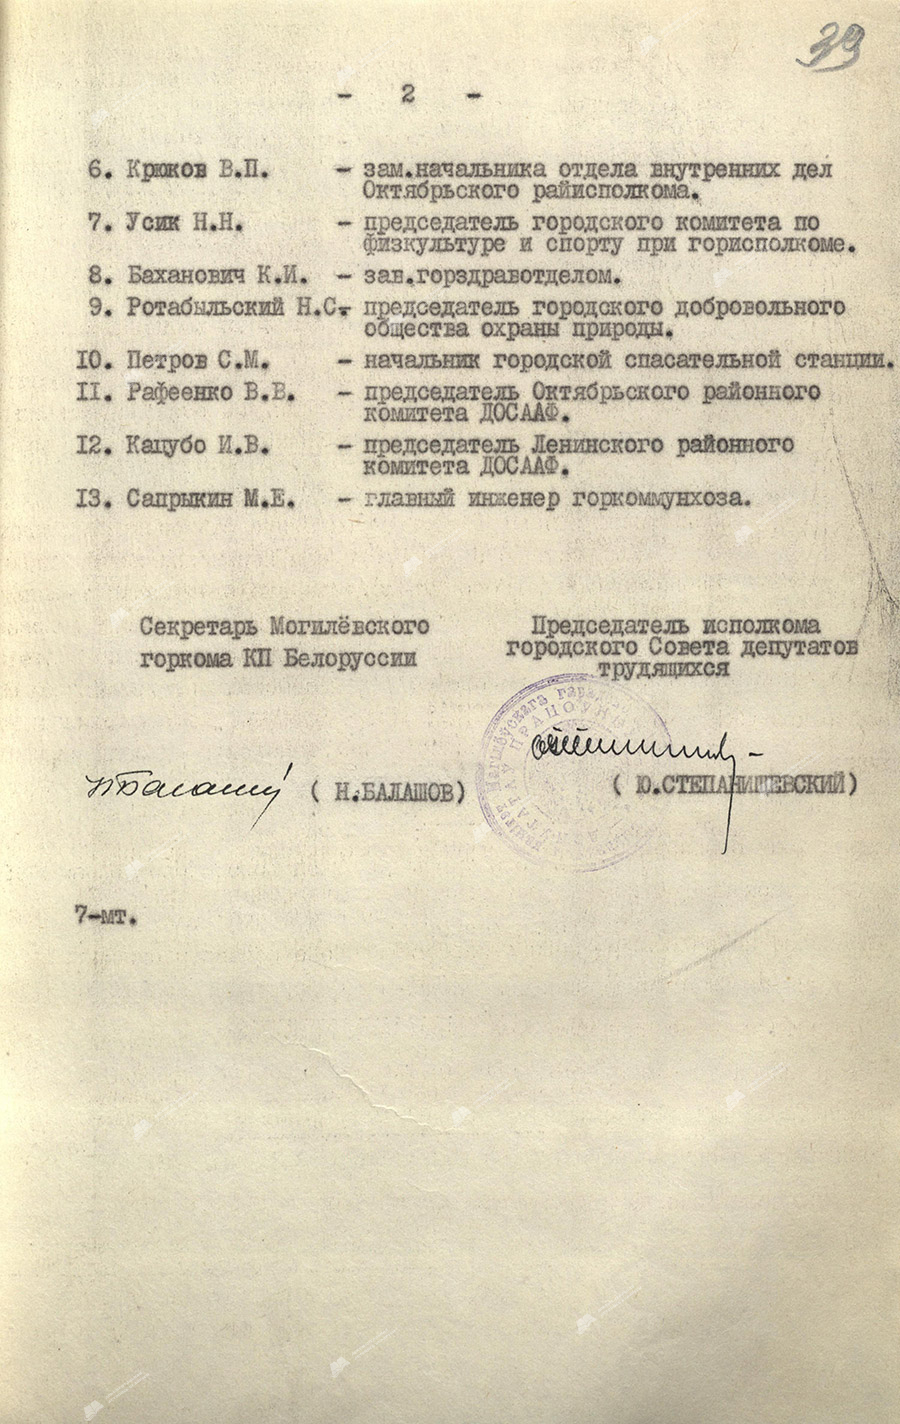 Resolution No. 209-40/3 of the Bureau of the City Committee of the Communist Party (Bolsheviks) of Belarus and the Executive Committee of the Mogilev City Council of Workers’ Deputies on the organization of the Mogilev City Water Rescue Society-с. 1